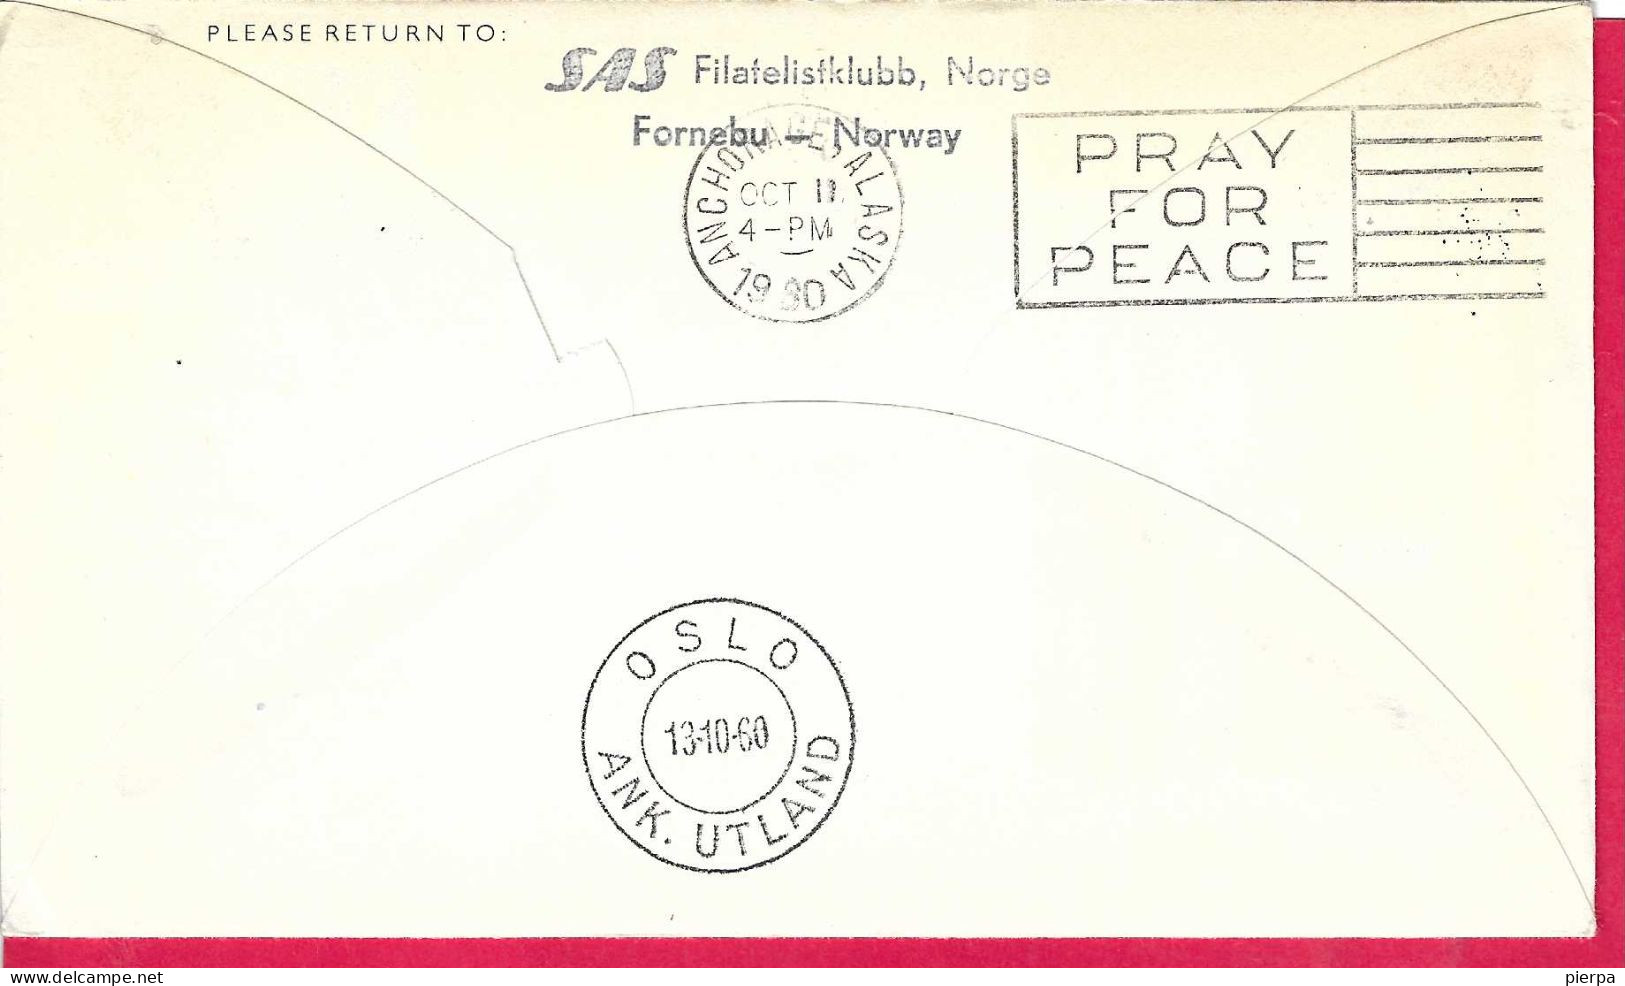 NORGE - FIRST DOUGLAS DC-8 FLIGHT - SAS - FROM OSLO TO ANCHORAGE *11.10.60* ON OFFICIAL COVER - Storia Postale